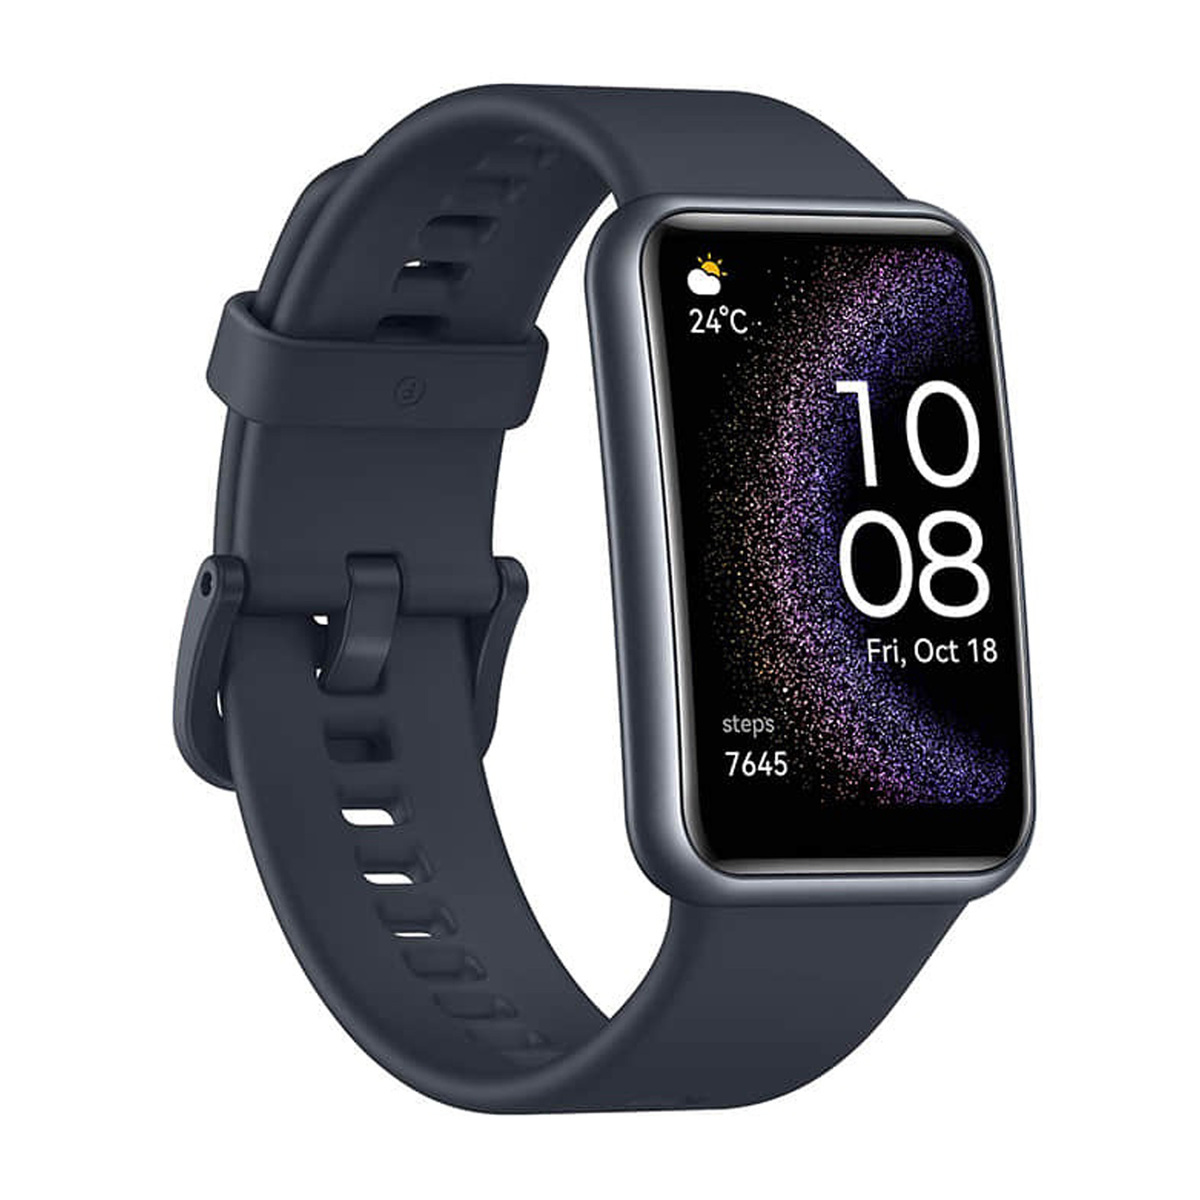 Huawei Smartwatch FIT Special Edition, Black